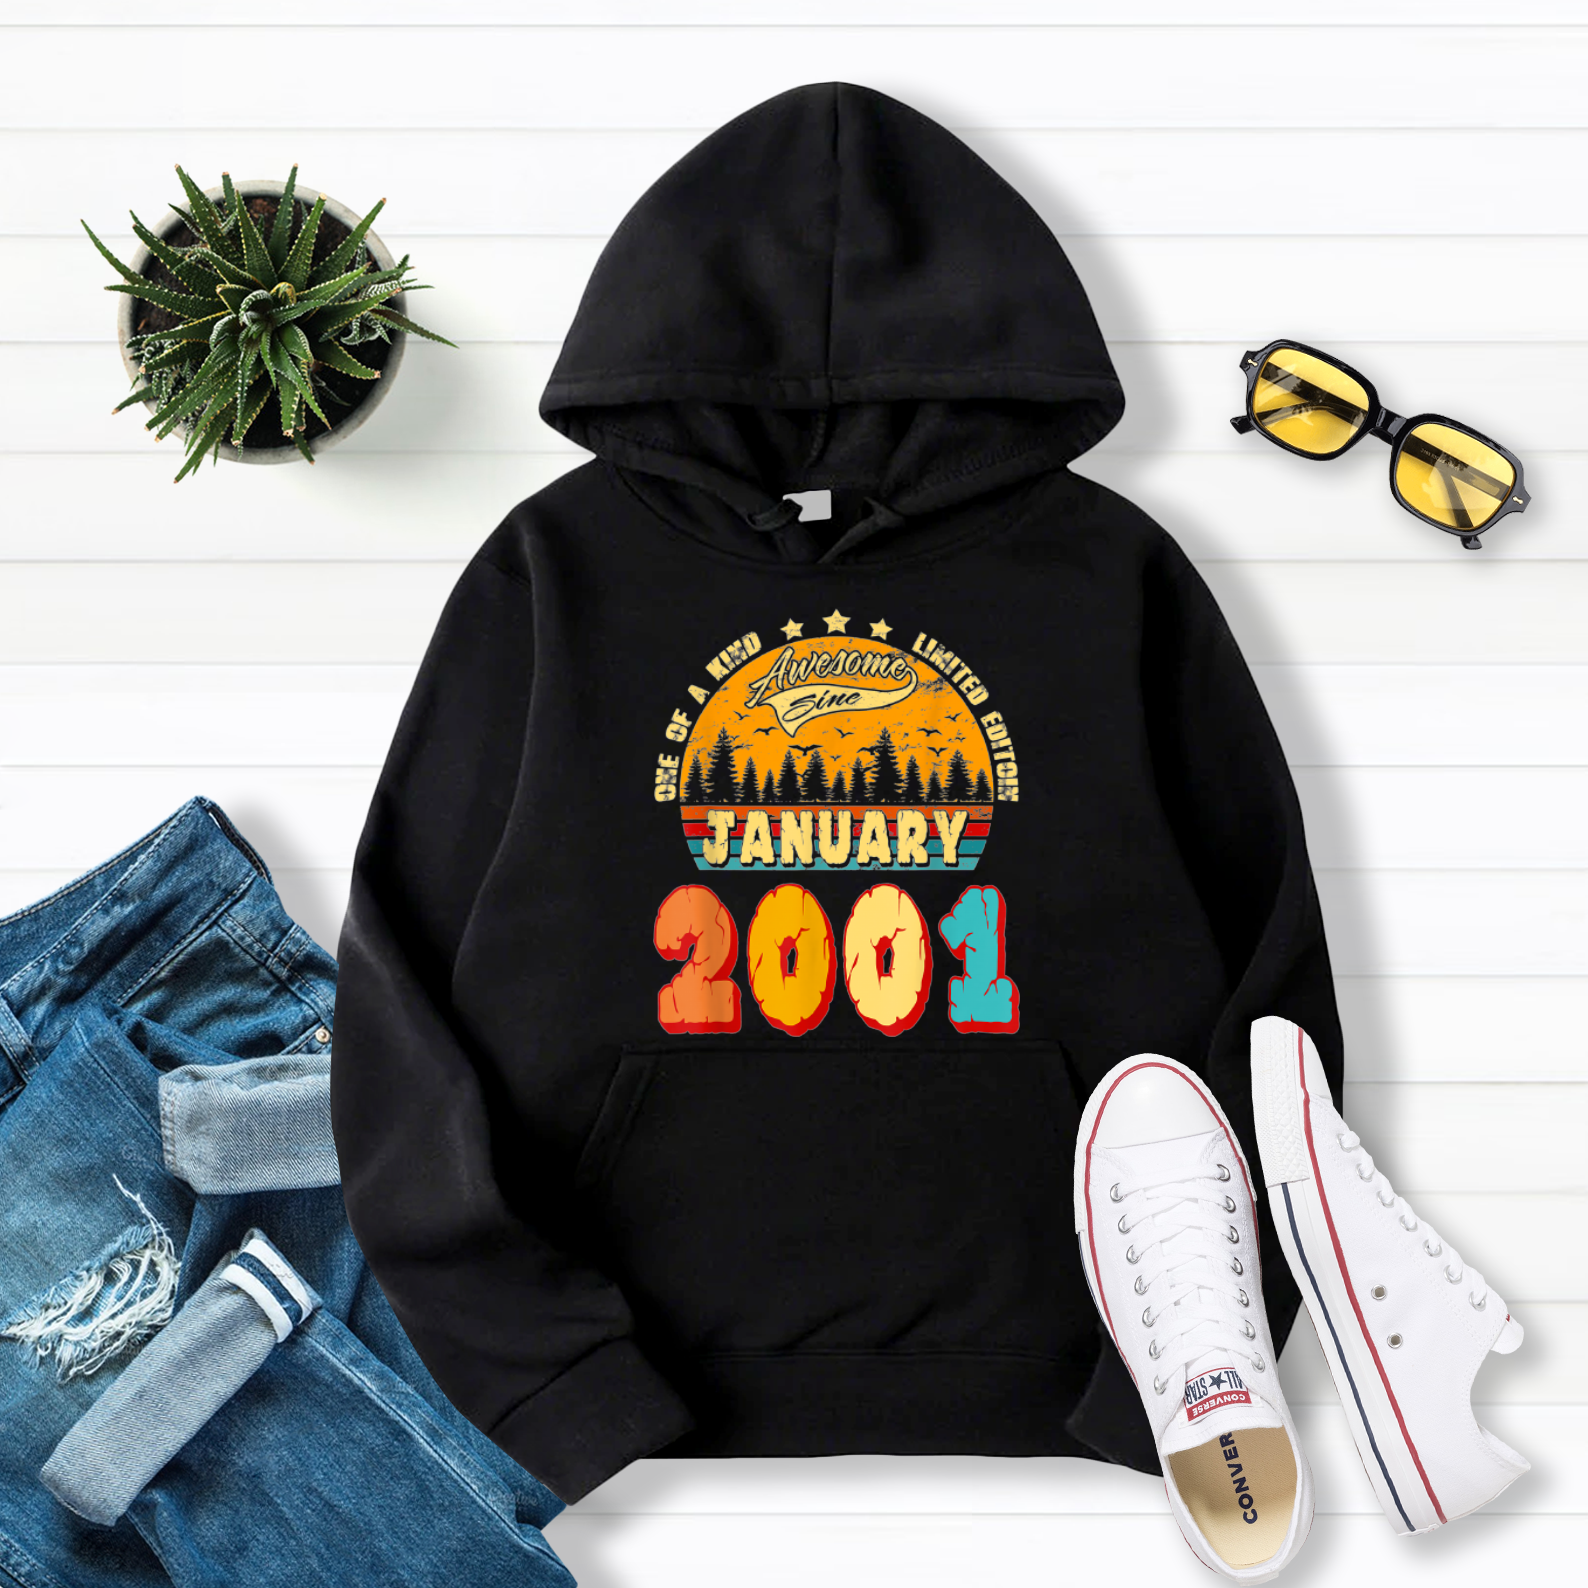 20 Years Old Gifts 20th Birthday Vintage January 2001 Pullover Hoodie Black S-5XL